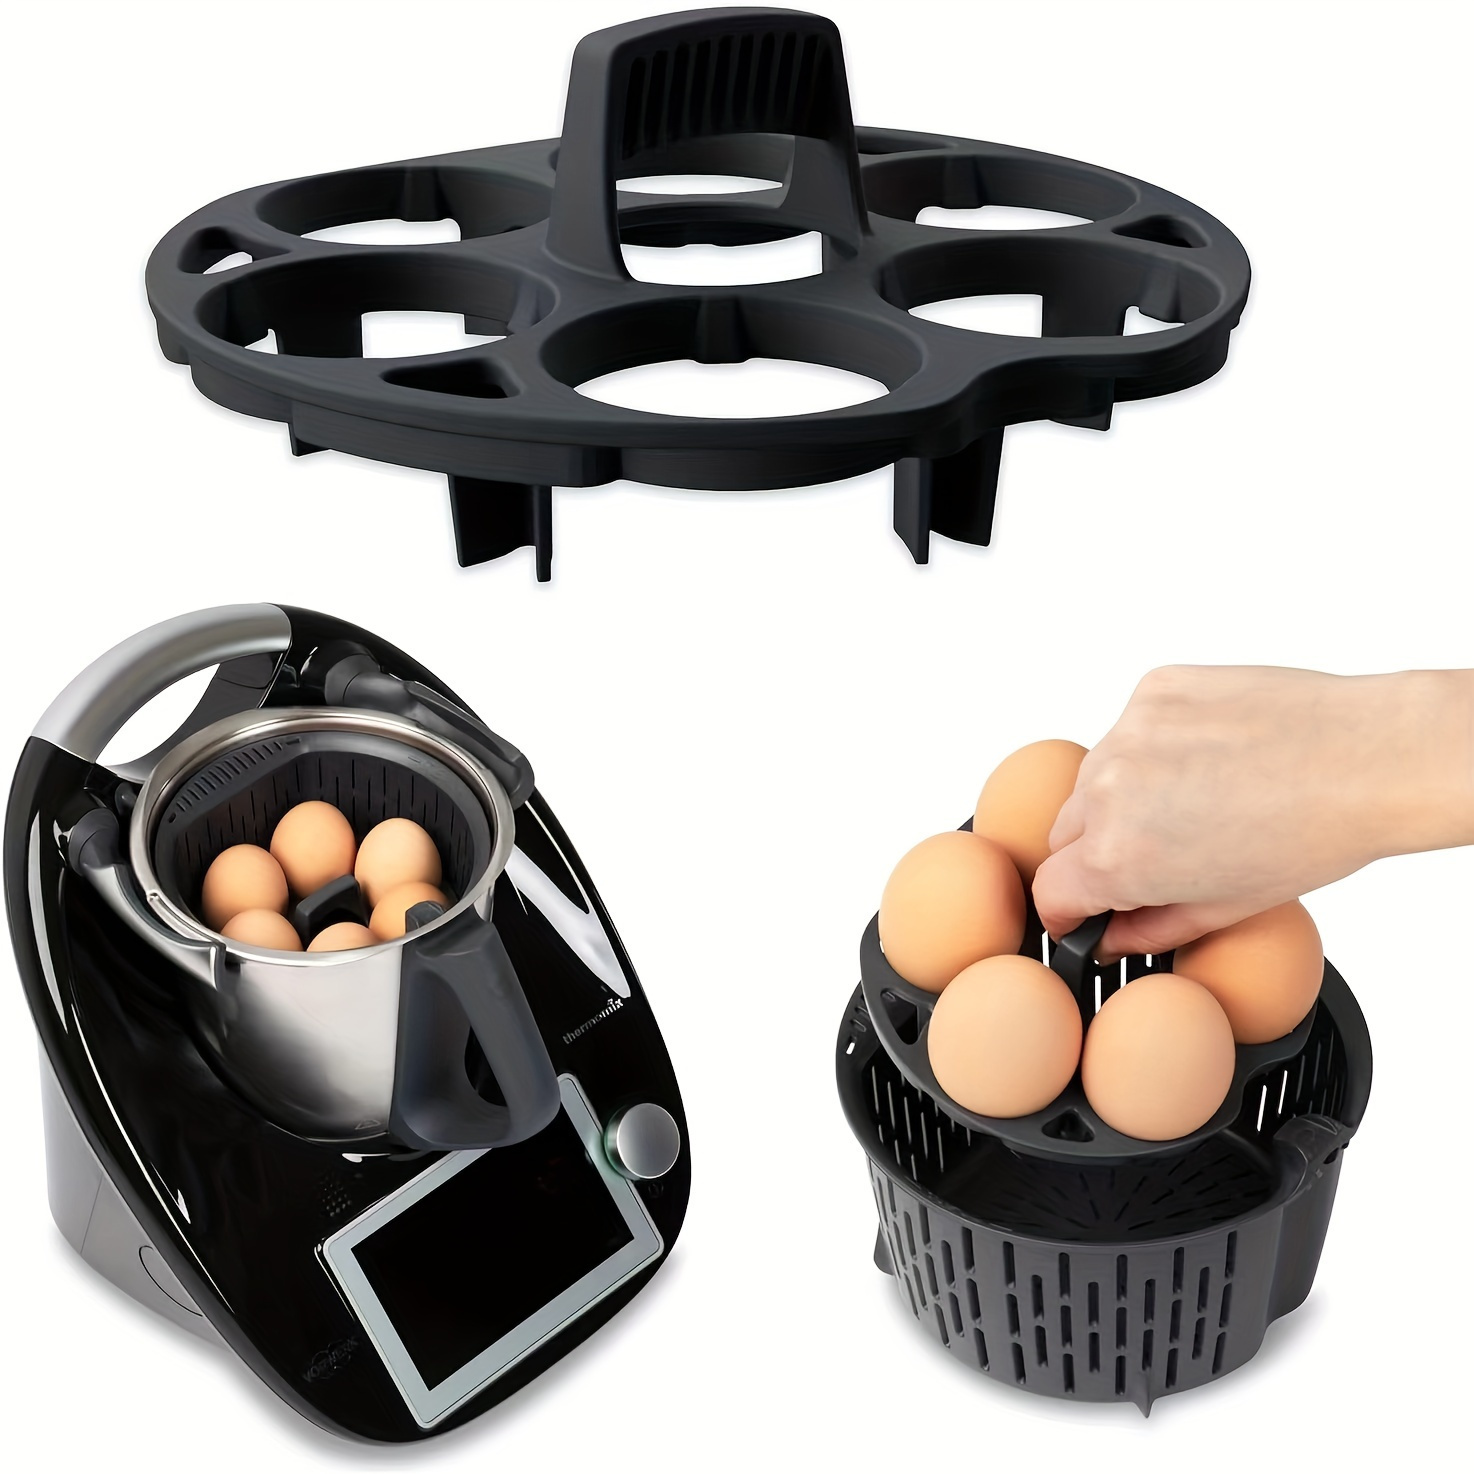 

Thermomix Egg Holder Cooking Basket - Plastic Egg Cooker Accessory For Tm31, Tm5, Tm6 Models - Practical, Easy-to-use, Safe And Secure Kitchen Tool For Steaming Eggs